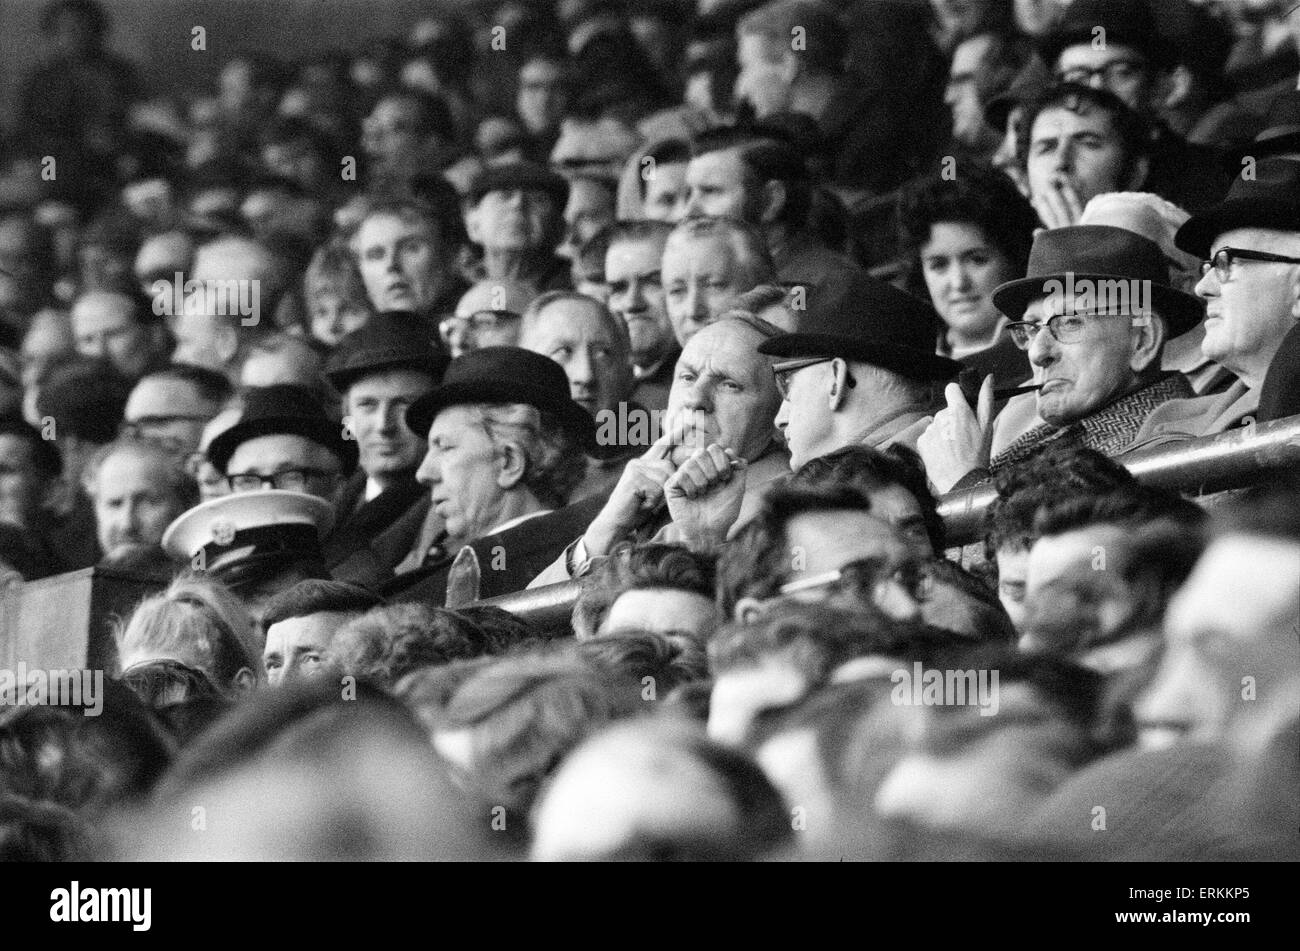 Liverpool manager Bill Shankly watching a game in the stands, April 1971. Stock Photo